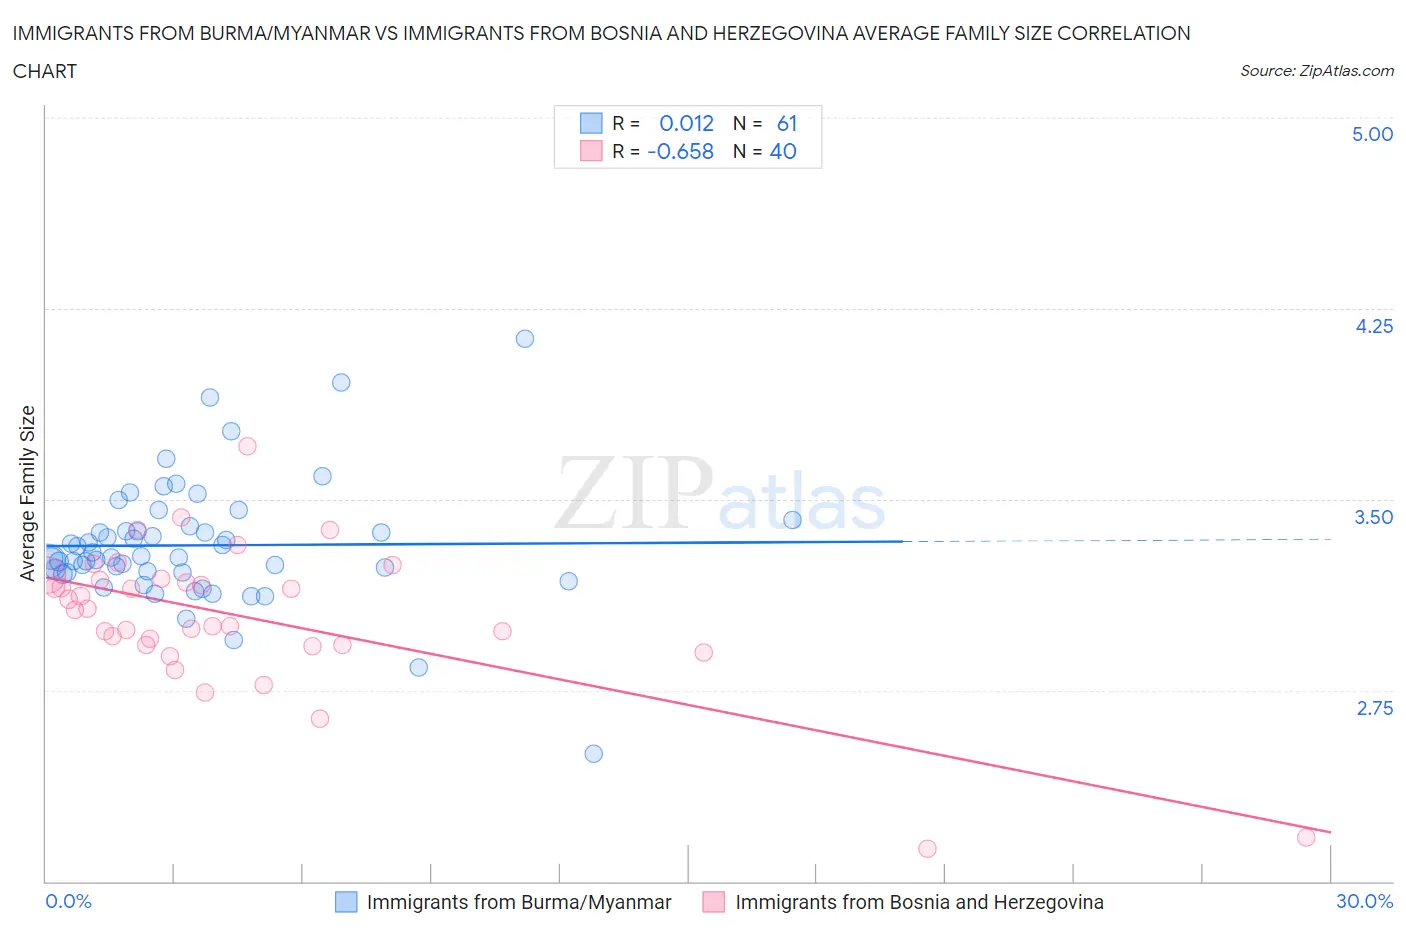 Immigrants from Burma/Myanmar vs Immigrants from Bosnia and Herzegovina Average Family Size